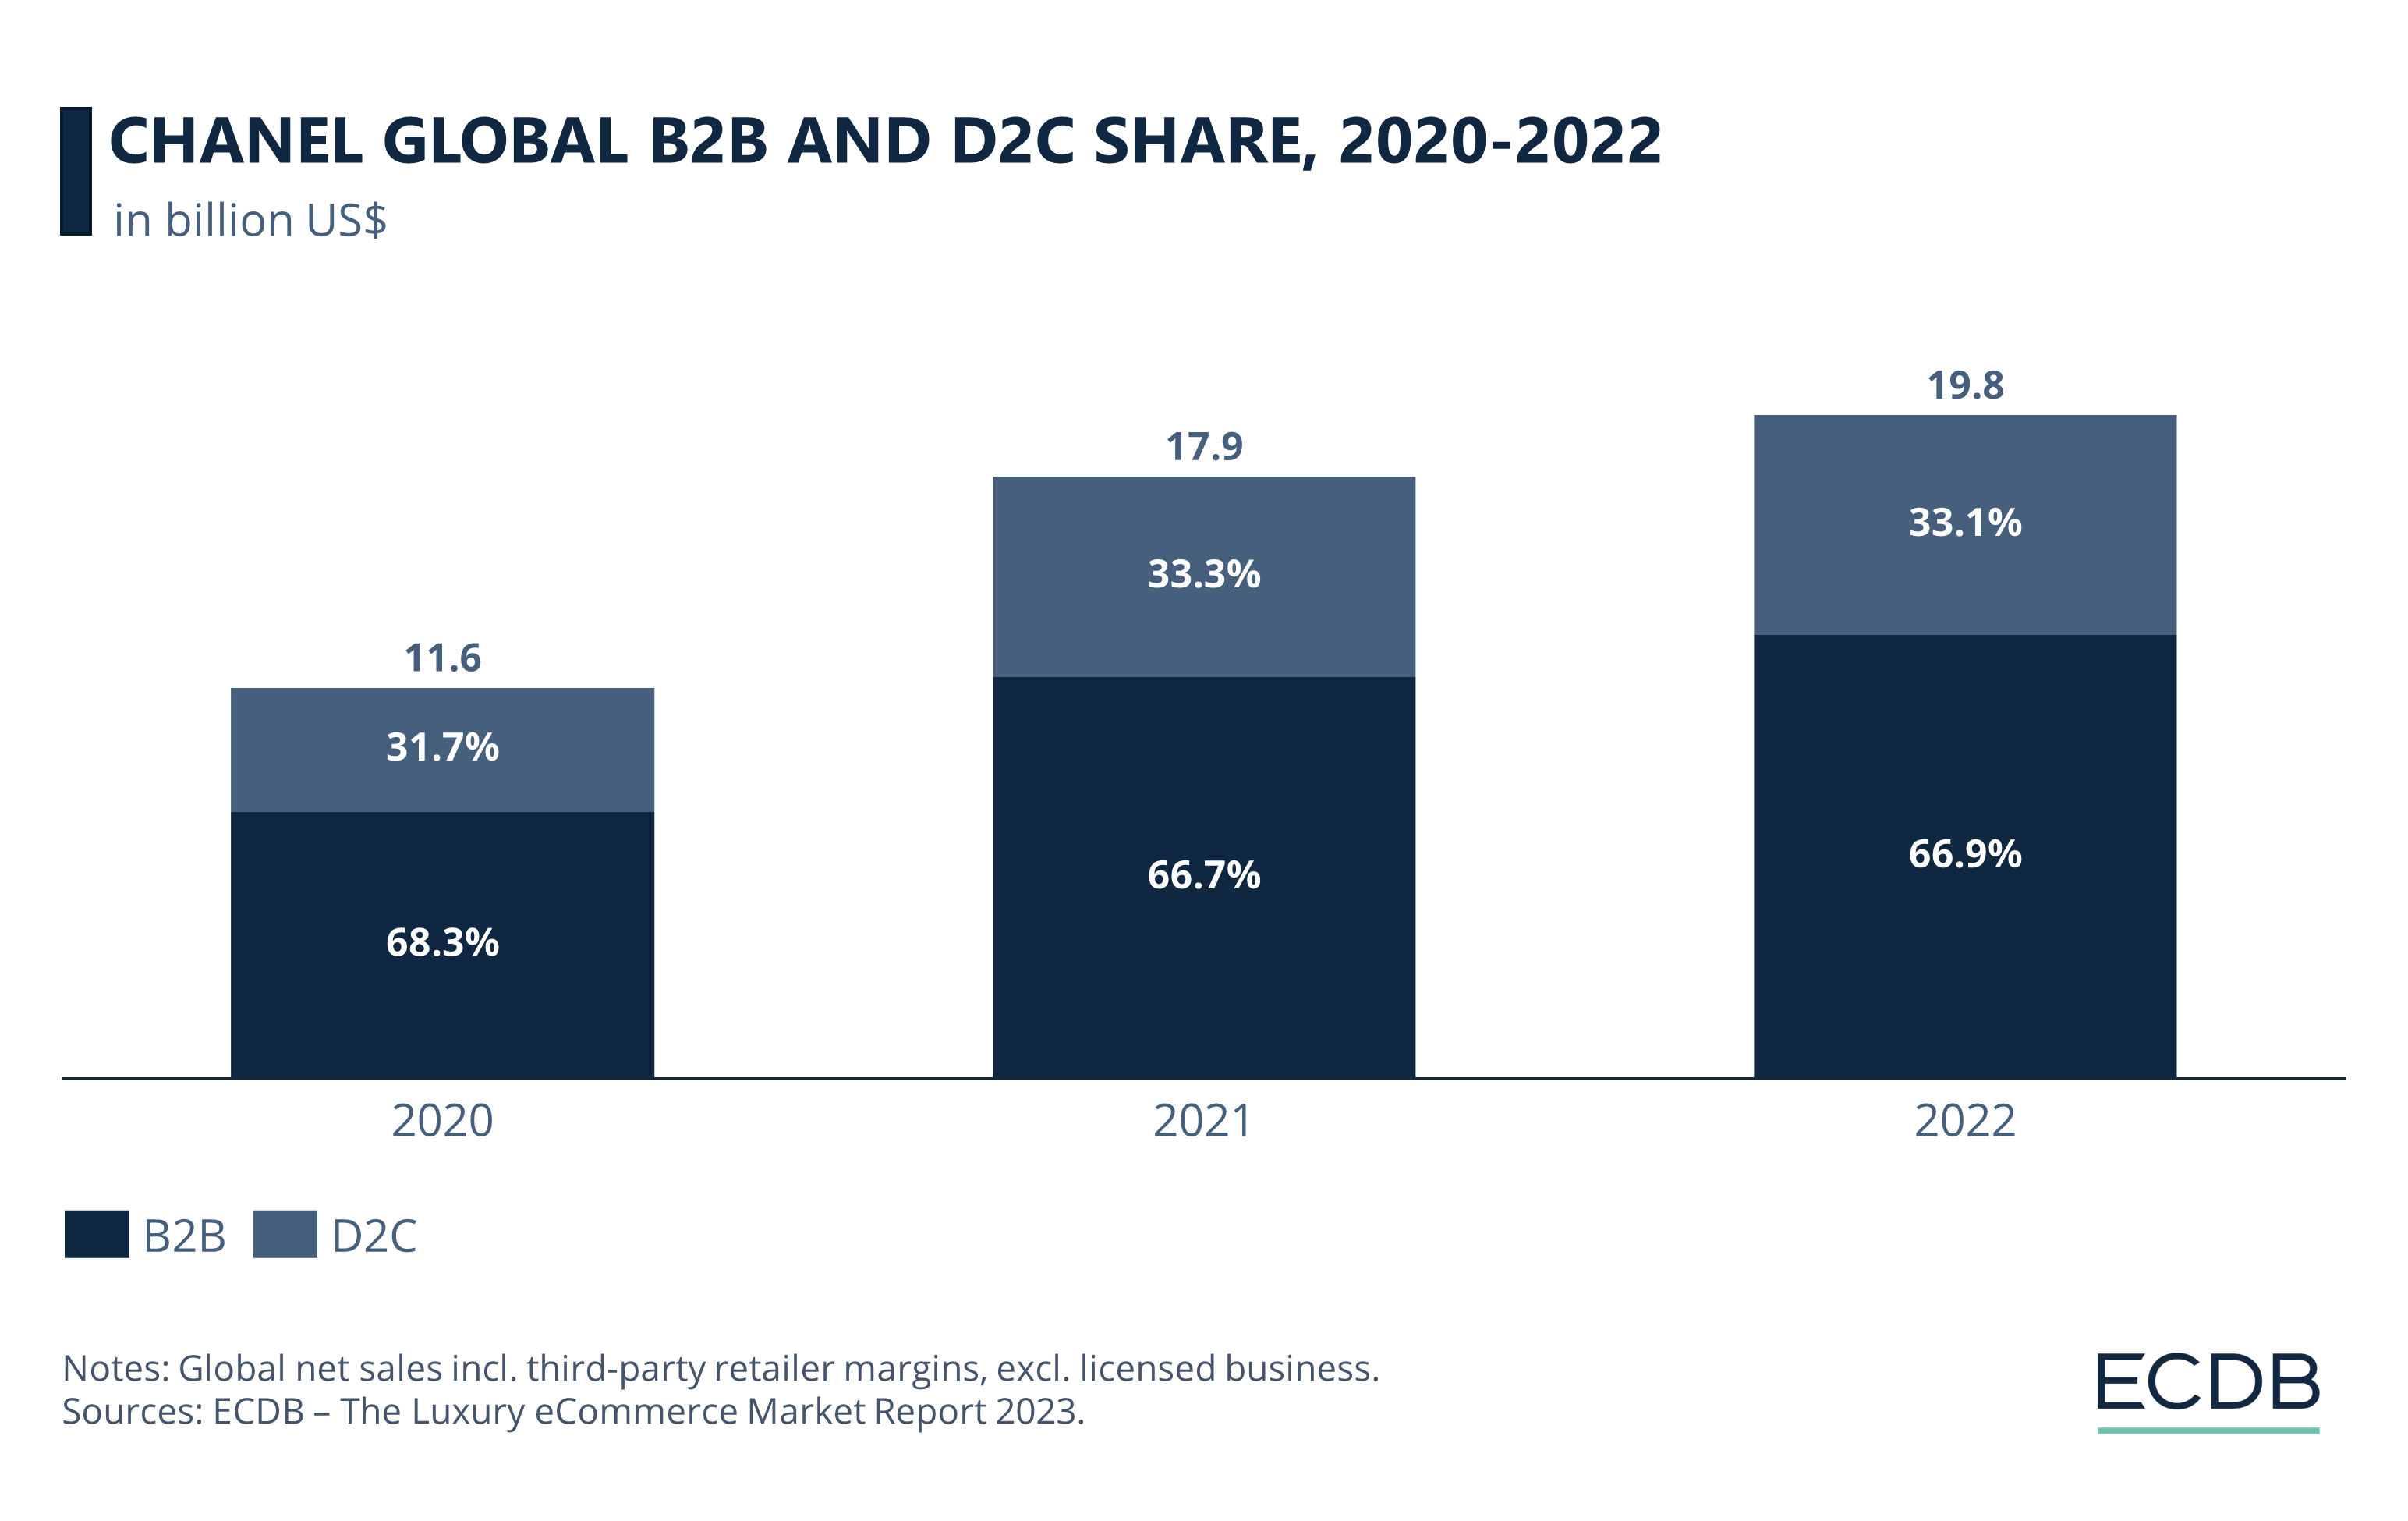 CHANEL Global D2C and B2B Share, 2020-2022